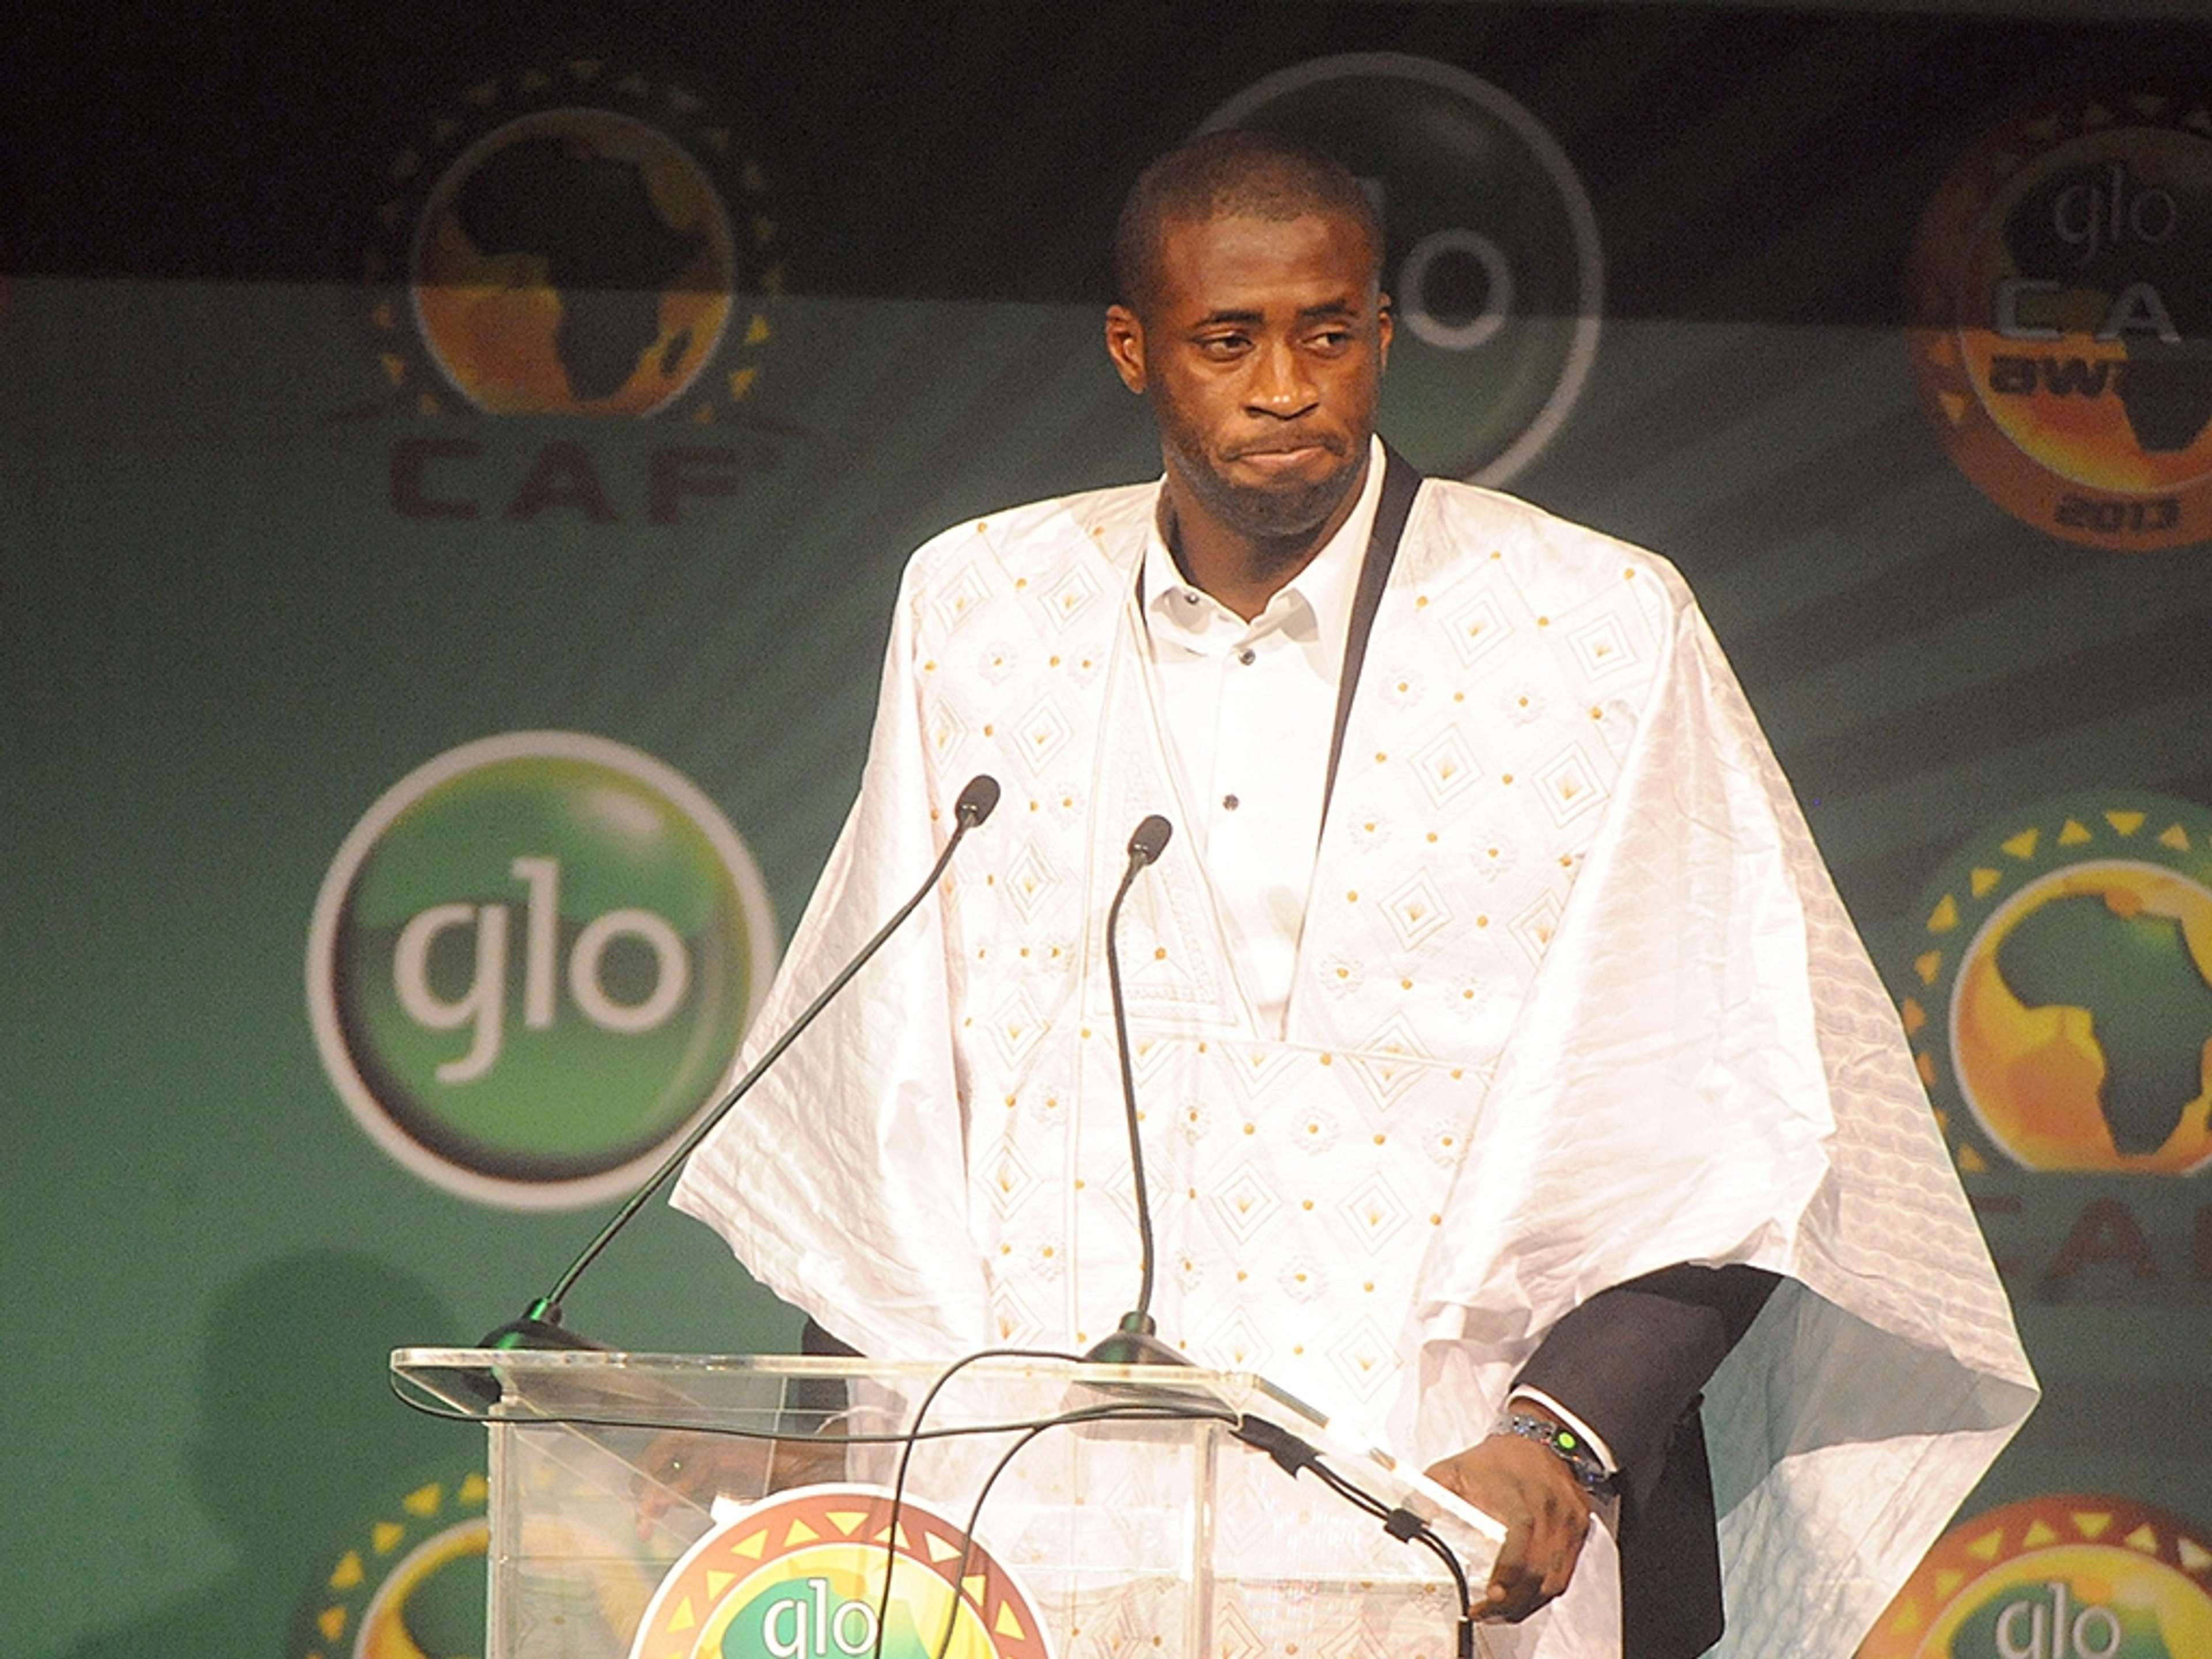 Yaya Toure CAF African Footballer of the Year 01092014